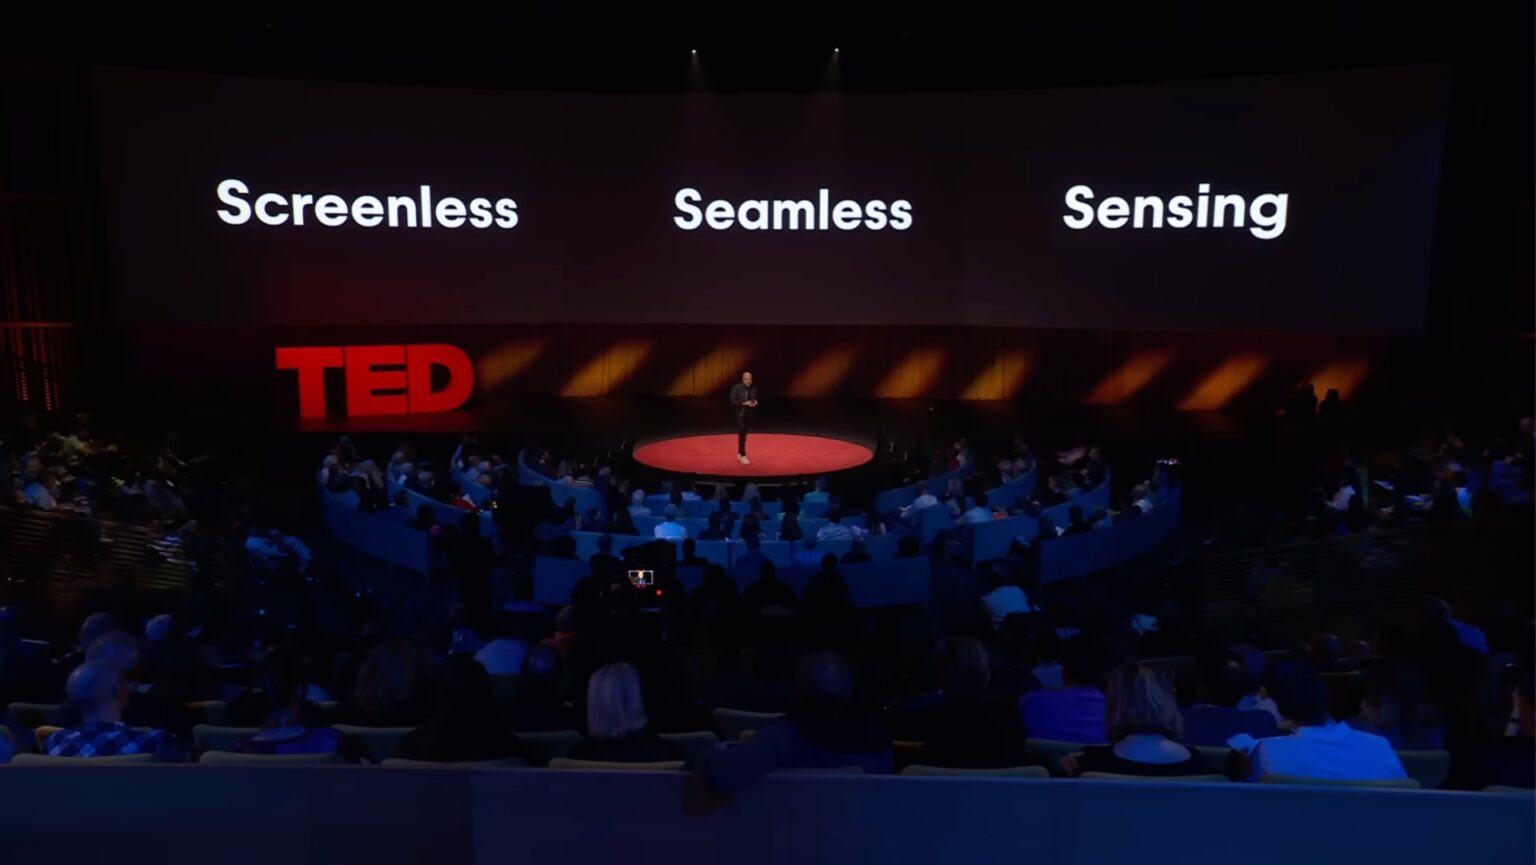 Imran Chaudhri standing on stage at a TED Talk with the phrase “Screenless Seamless Sensing” written on a slide behind him